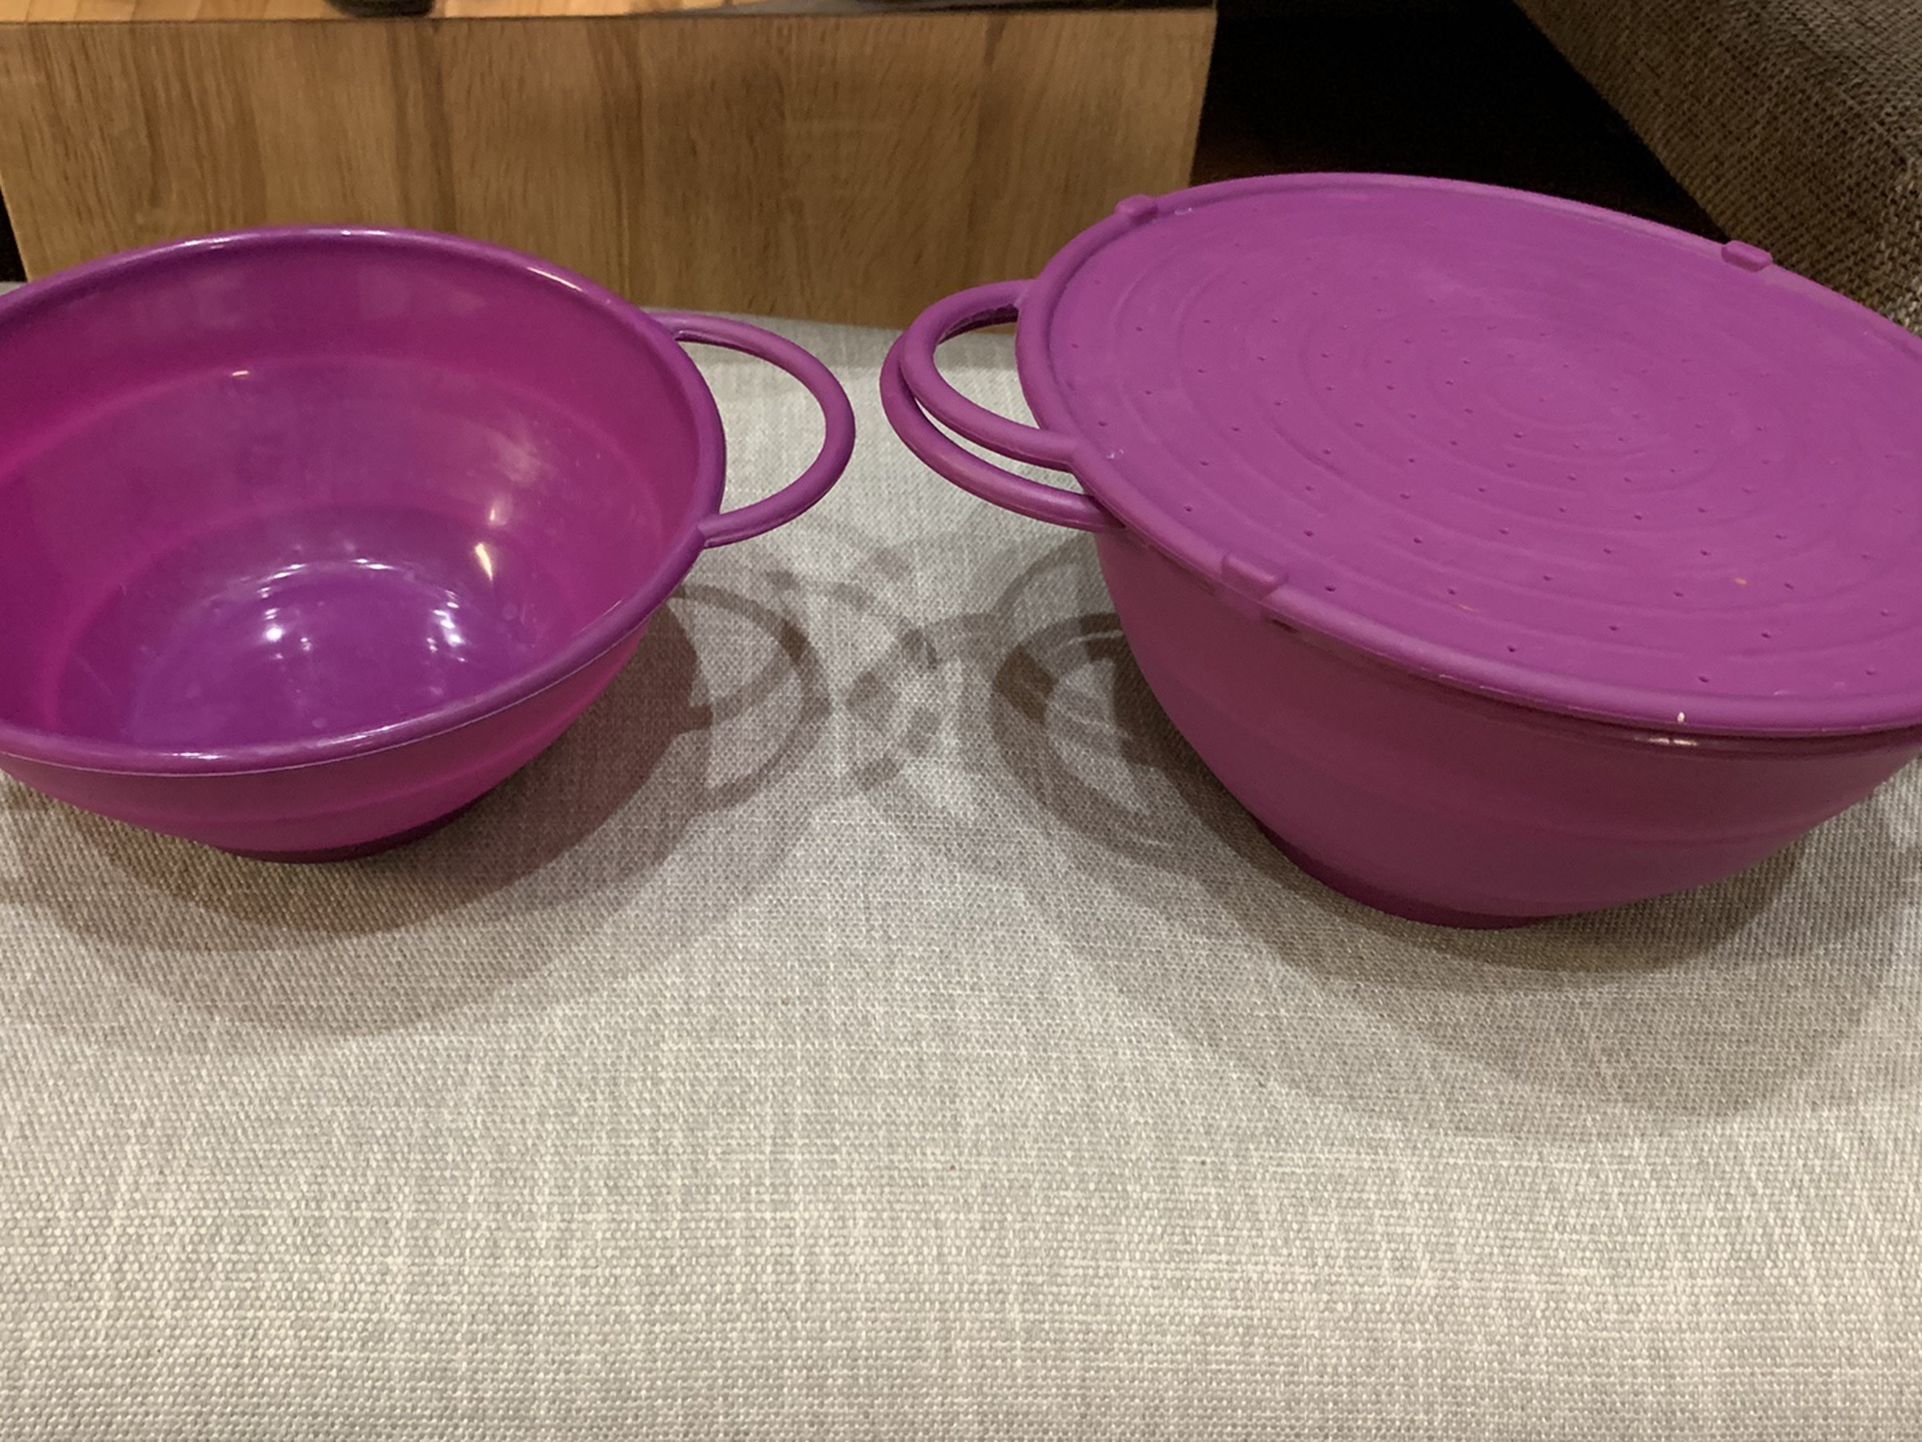 Cooks Essentials 3pc Collapsible Nesting Bowl Silicone Set With Draining Lid - Purple